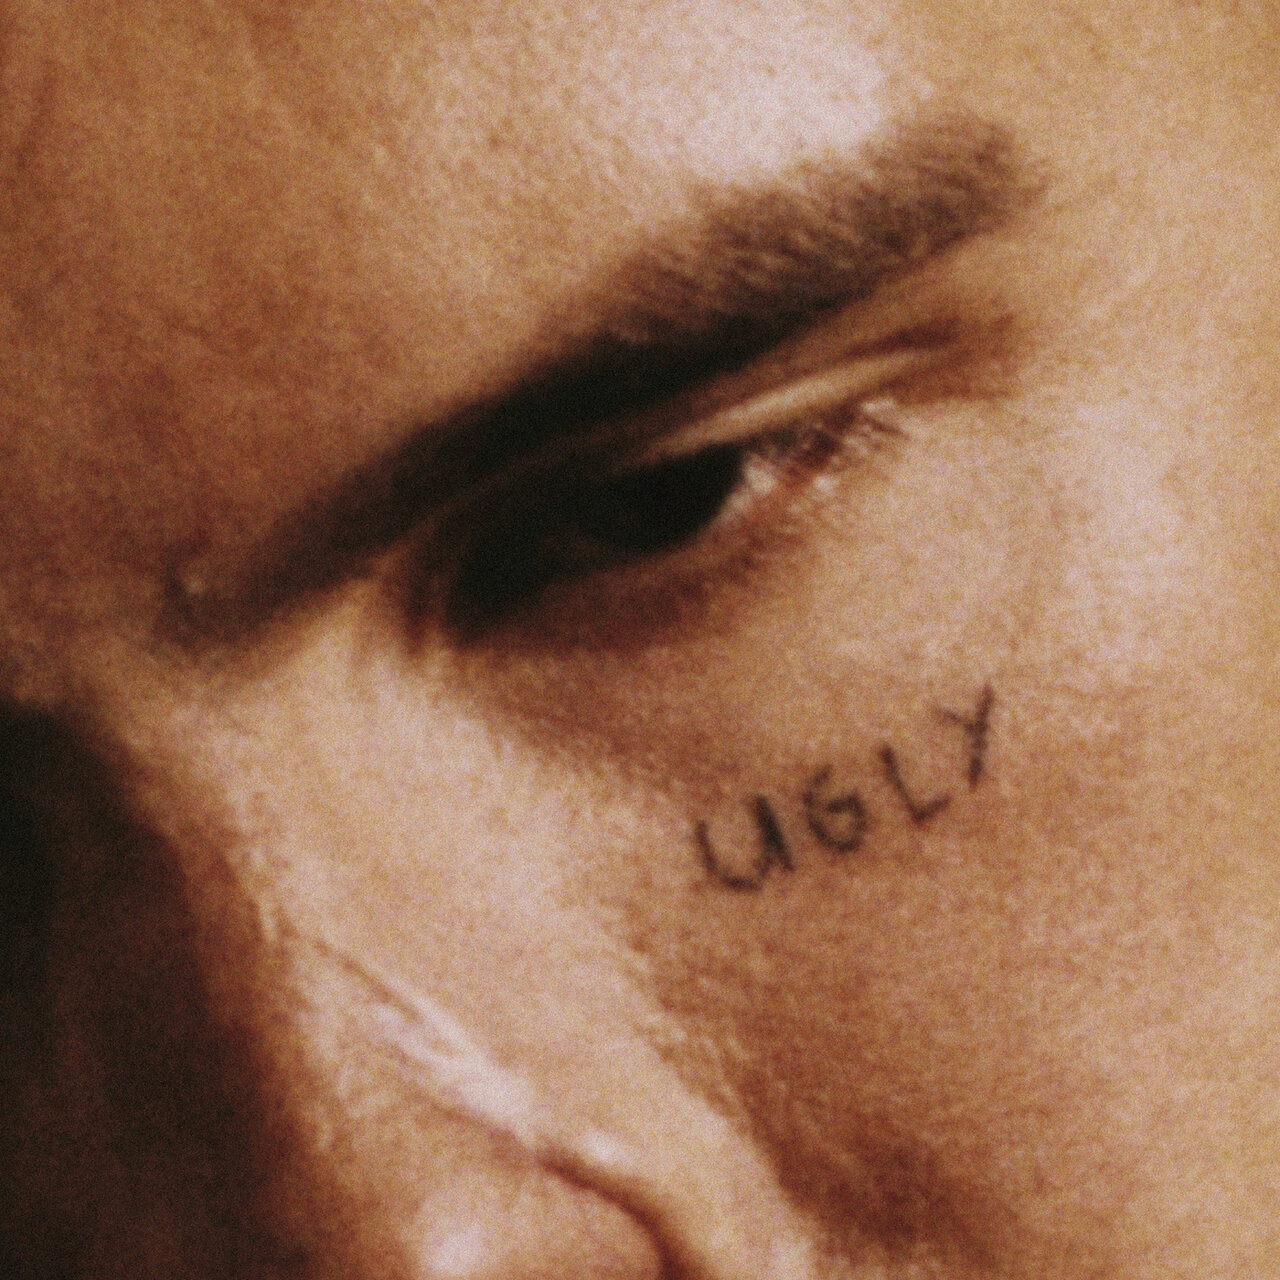 Album cover for 'UGLY' by Slowthai